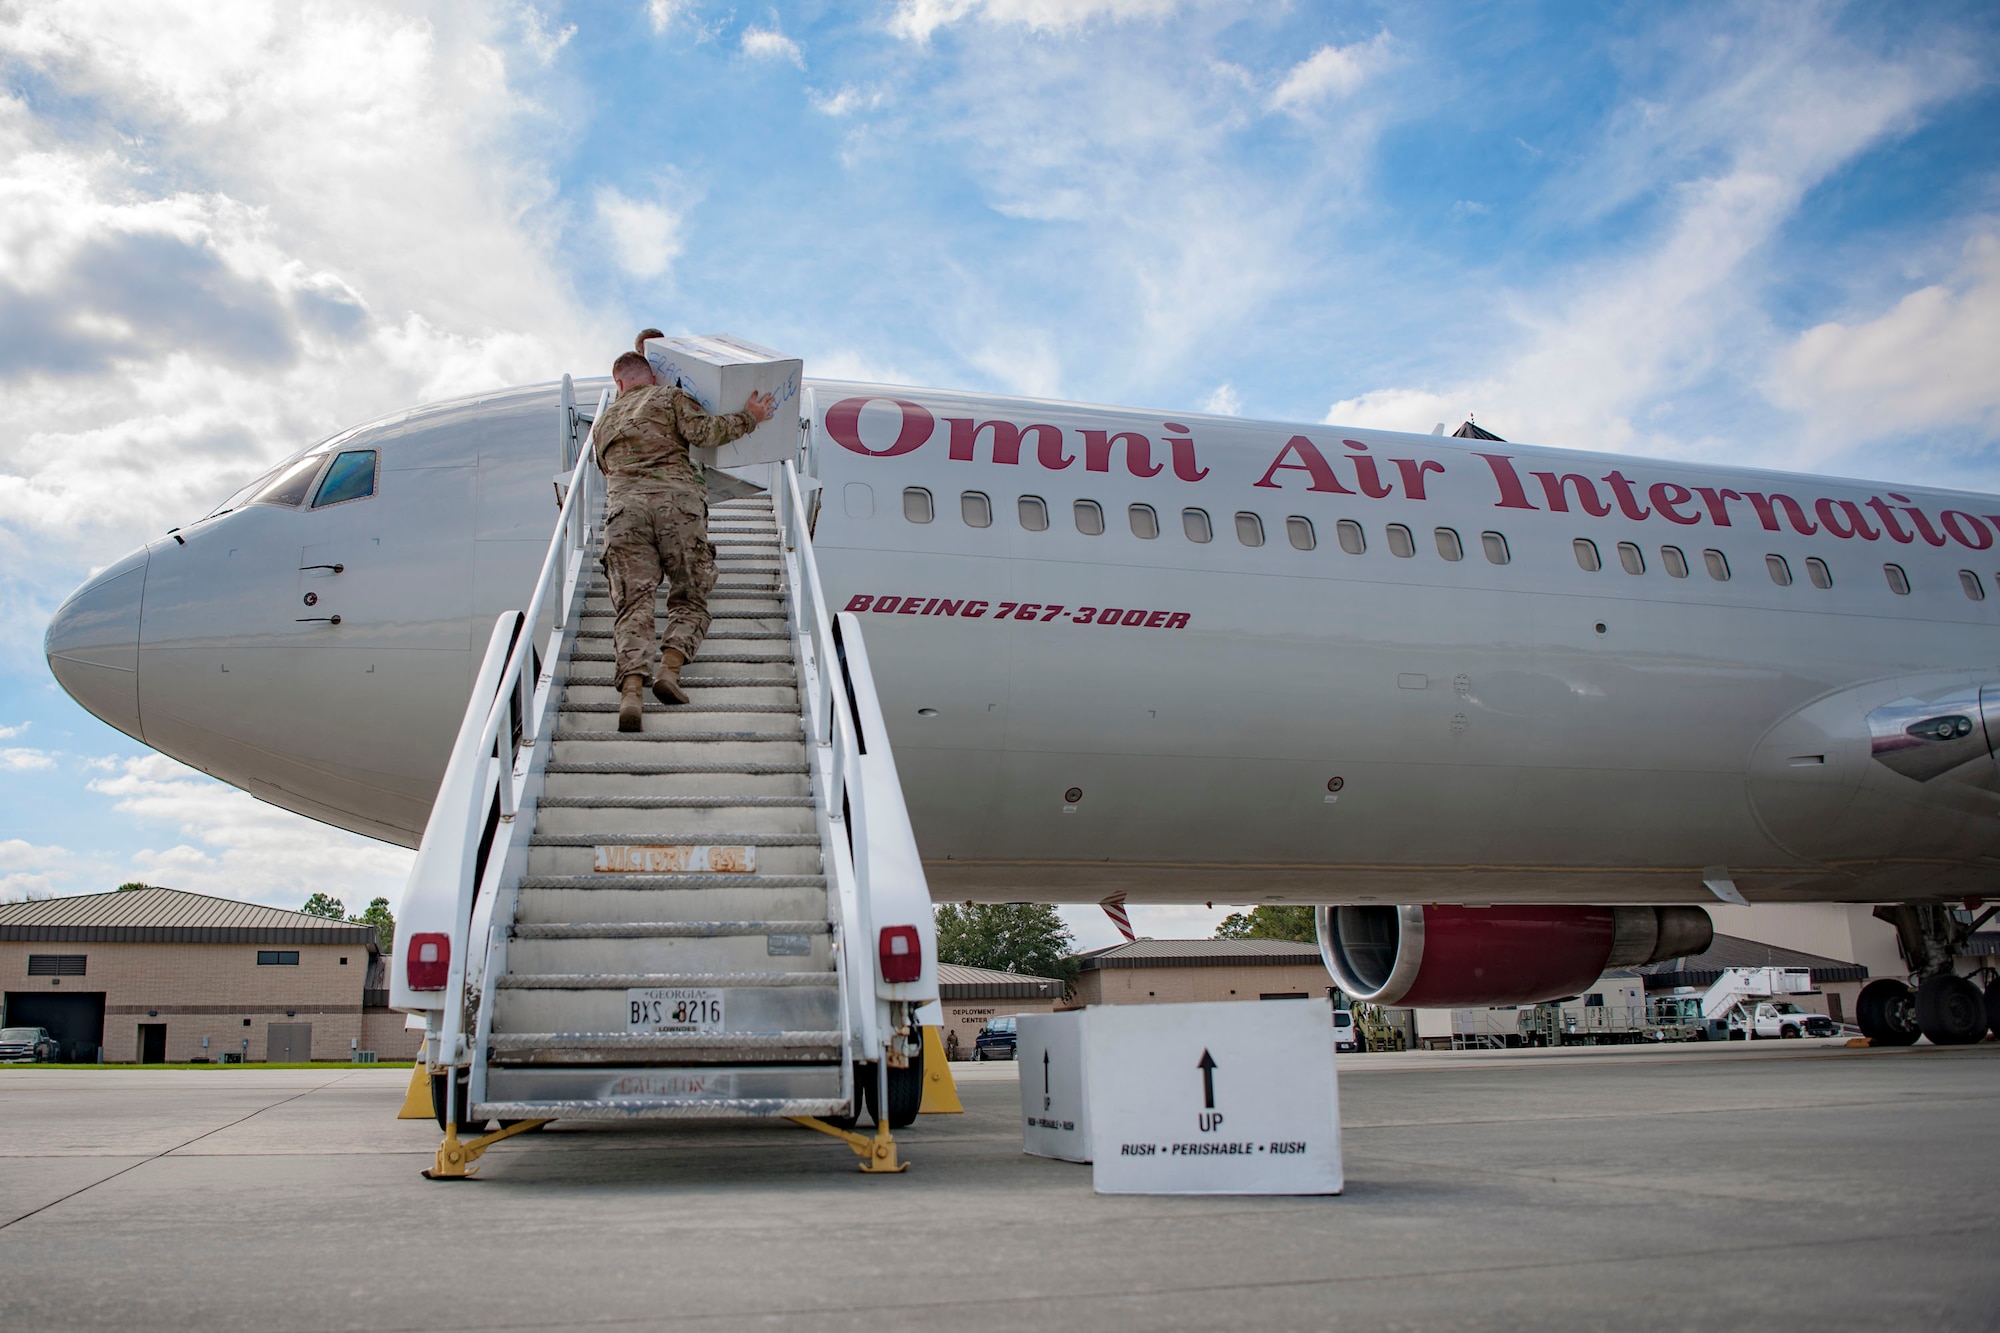 Airmen from the 820th Base Defense Group carry boxes onto a Boeing 767-300ER, Oct. 24, 2018, at Moody Air Force Base, Ga. The 822d, 823d and 824th Base Defense Squadrons (BDS) provide high-risk force protection and integrated base defense for expeditionary air forces. Airmen from the 823d BDS just returned home from conducting relief-in-place in the United States Africa Command theater while Airmen from the 824th BDS took their place.
(U.S. Air Force photo by Airman Taryn Butler)